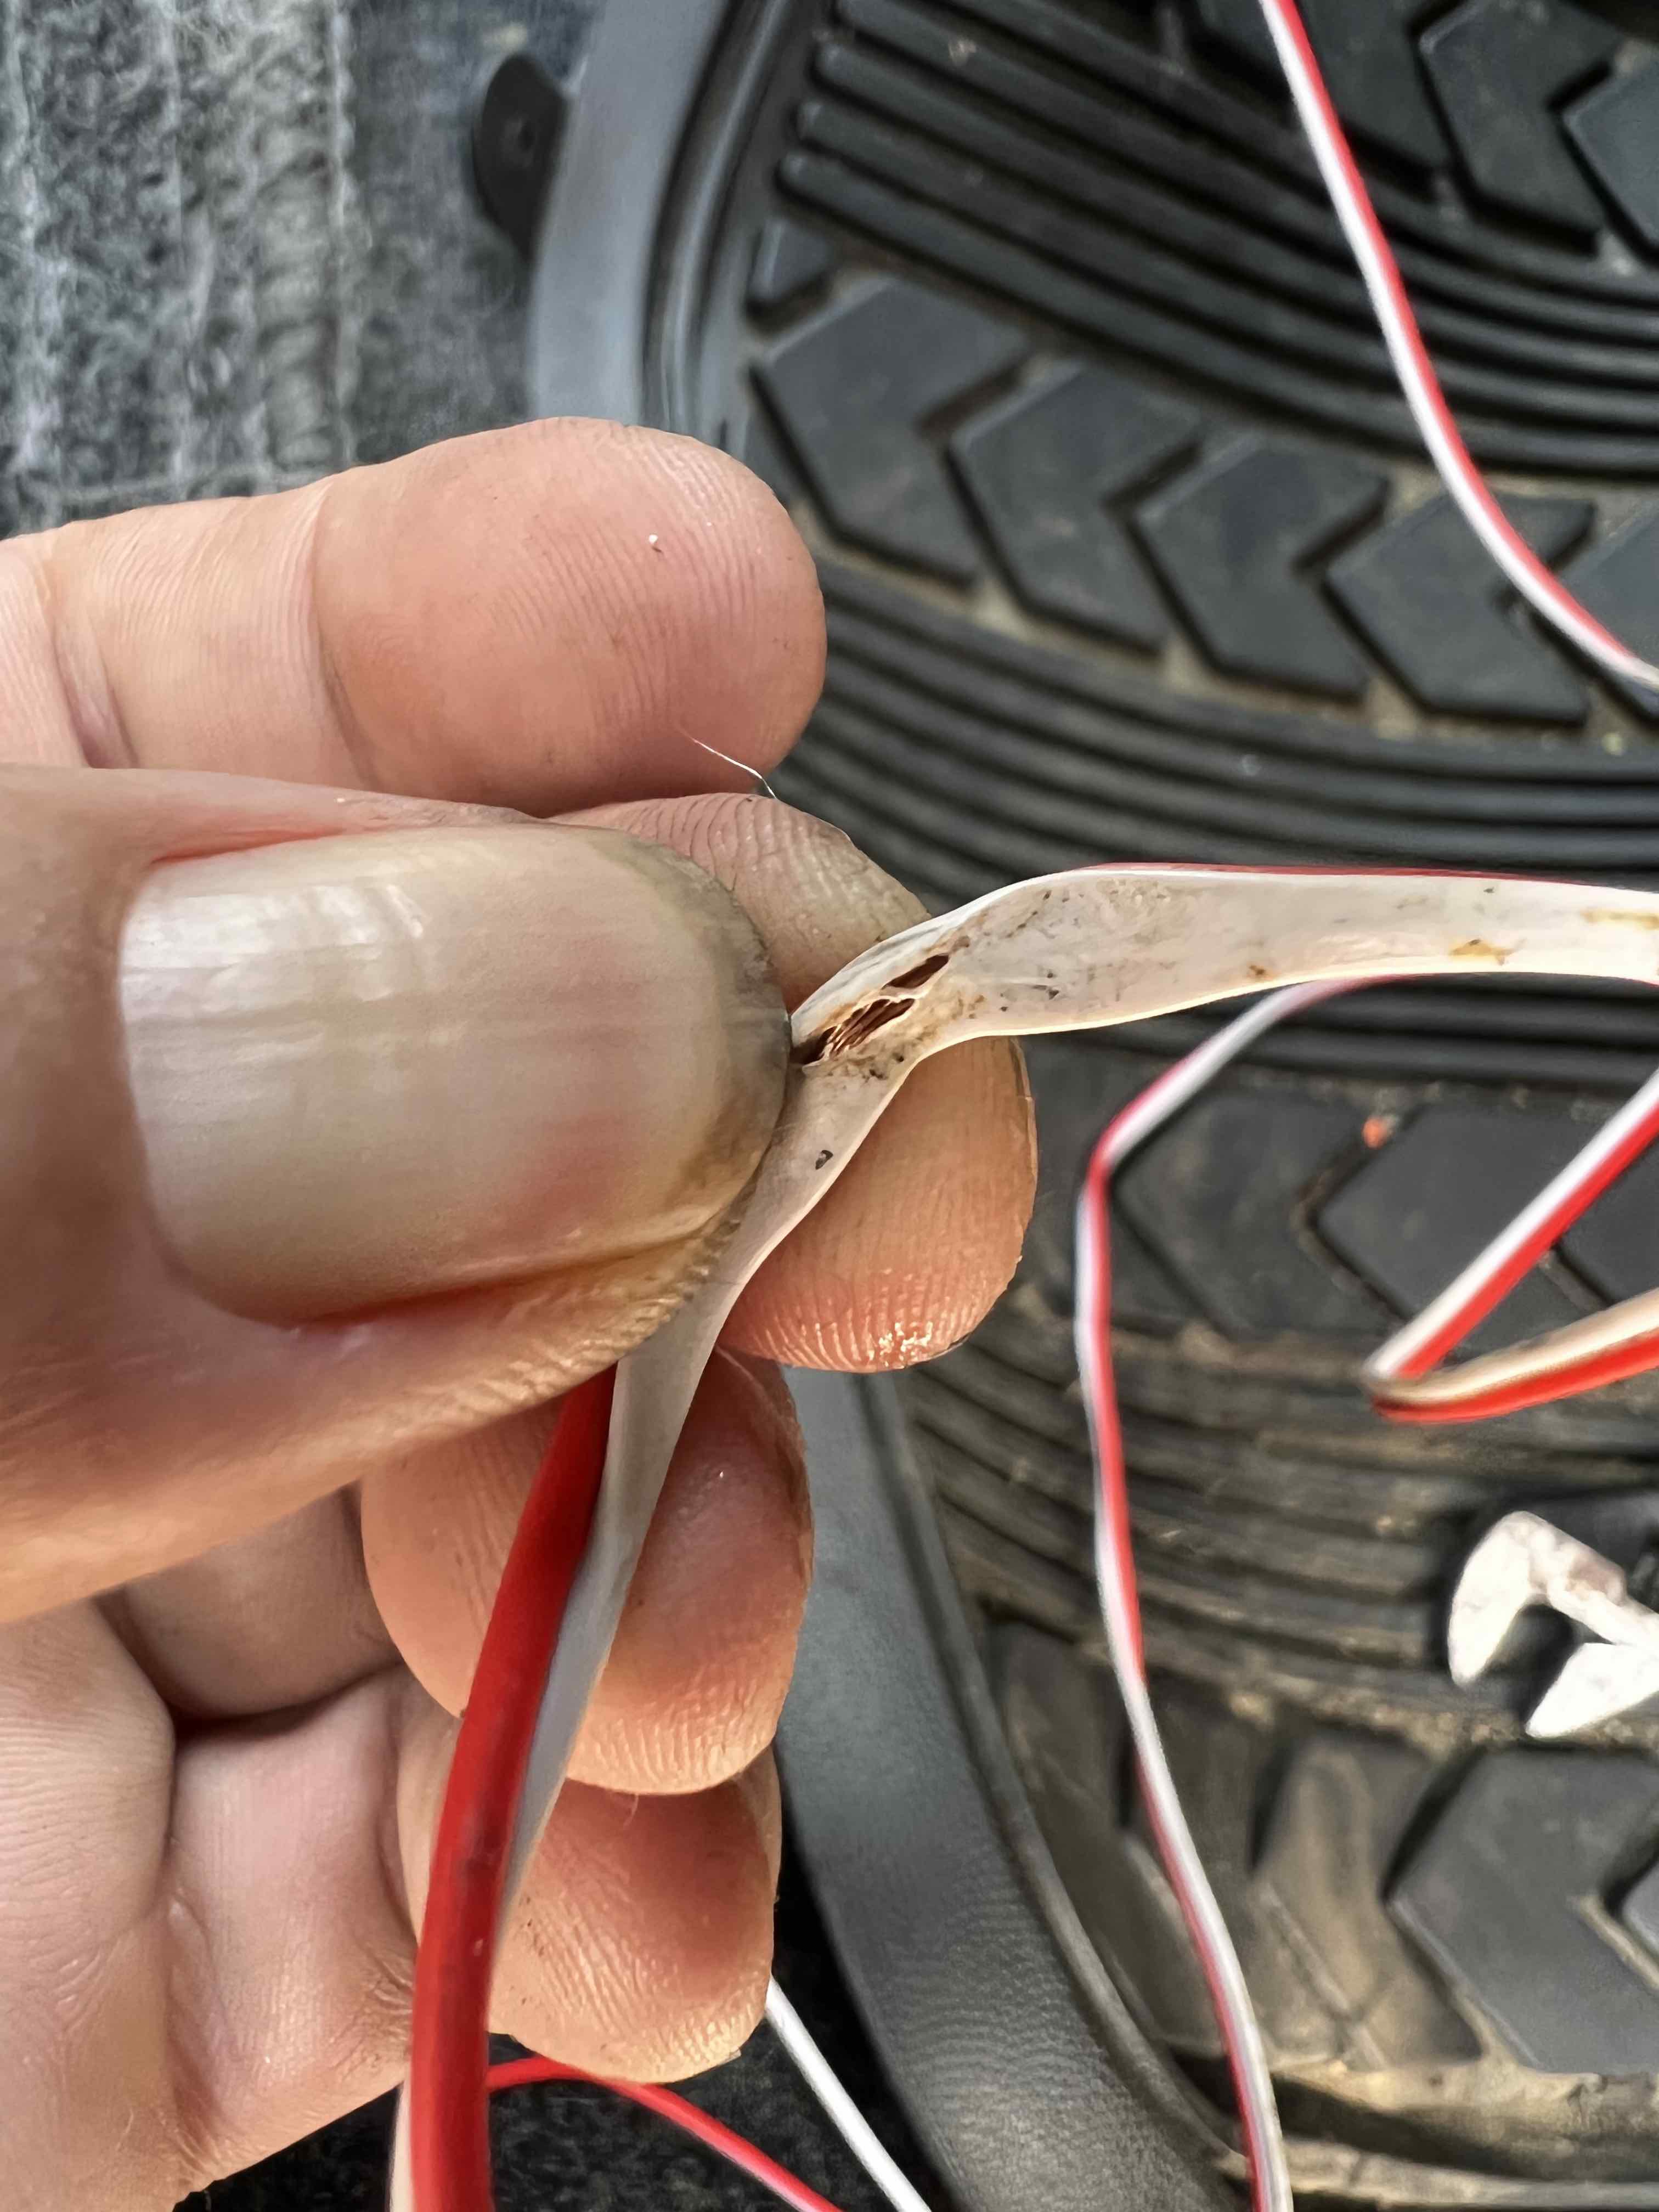 Exposed wire caused short in stereo